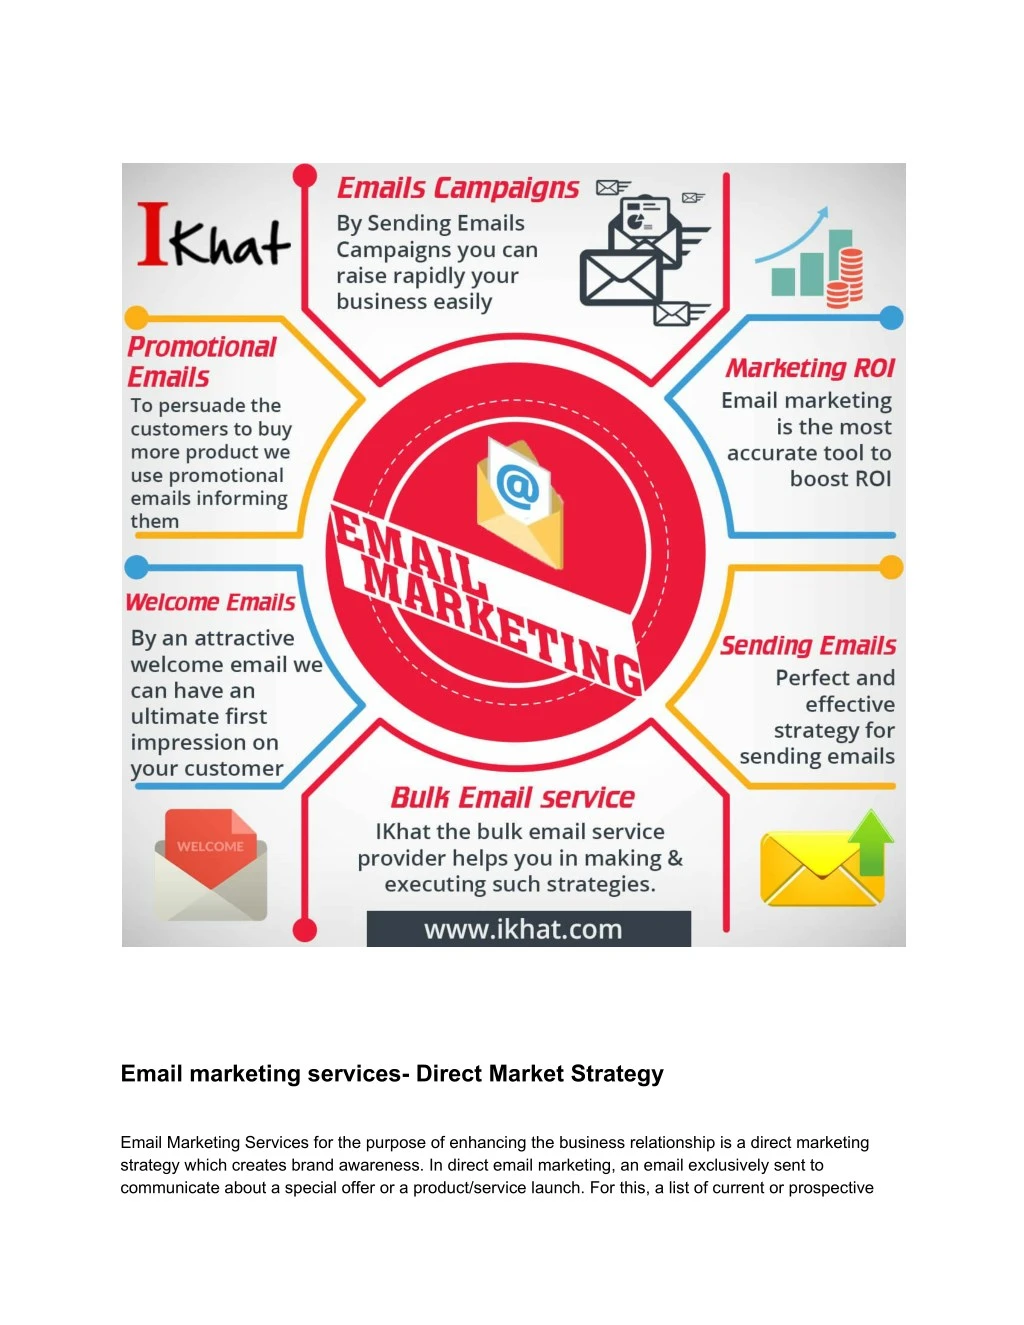 email marketing services direct market strategy